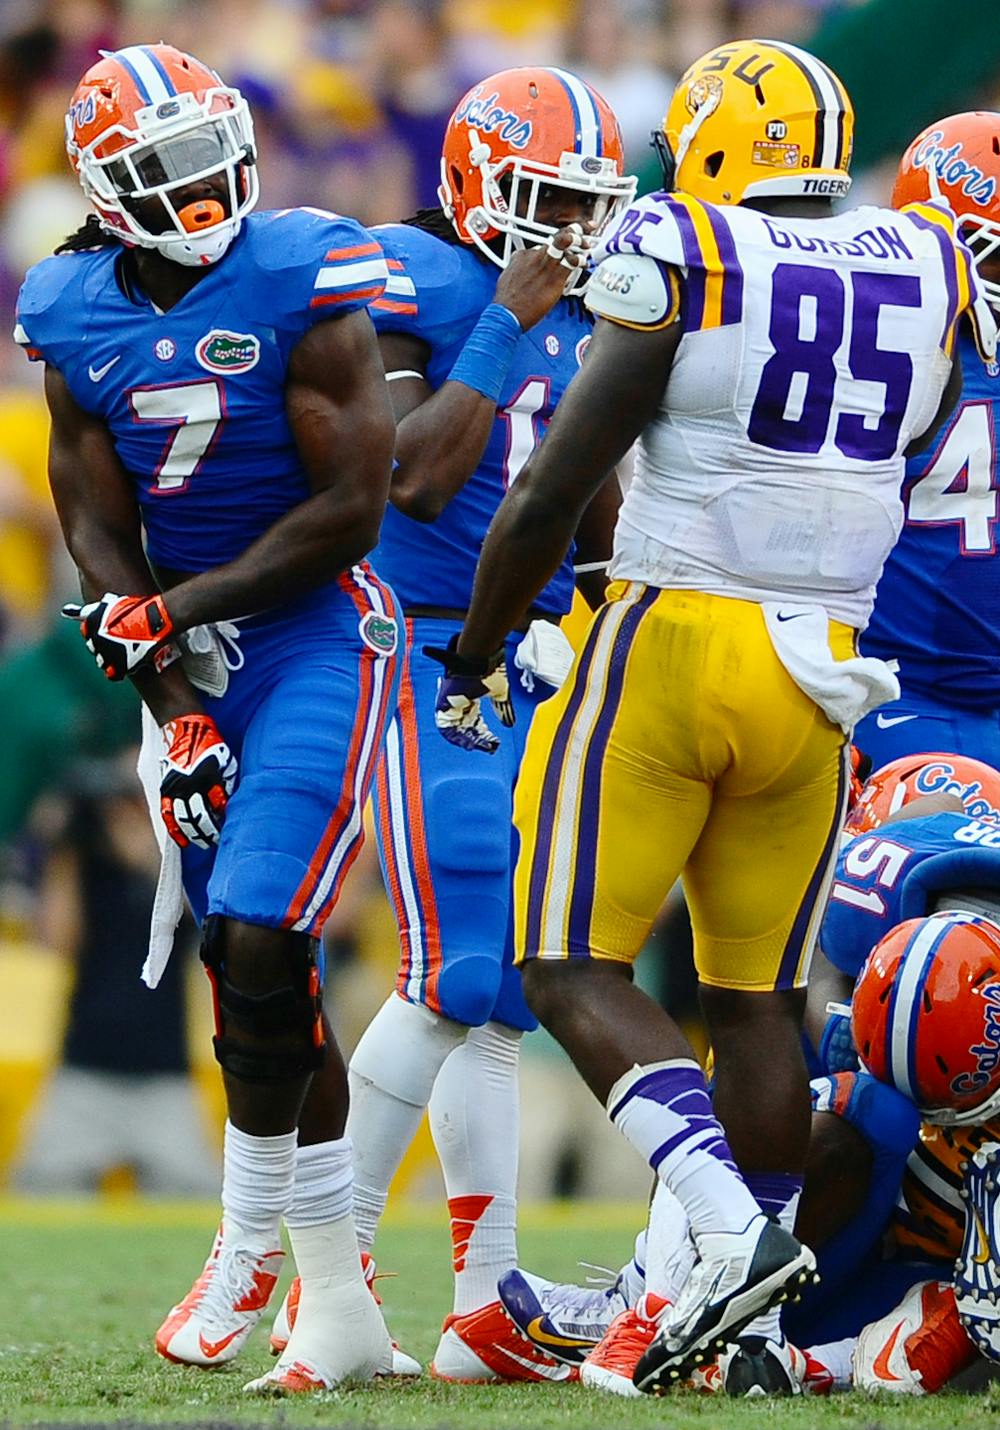 <p>Redshirt junior Ronald Powell (7) reacts to a play during Florida’s 17-6 loss to LSU on Oct. 12 at Tiger Stadium in Baton Rouge, La.</p>